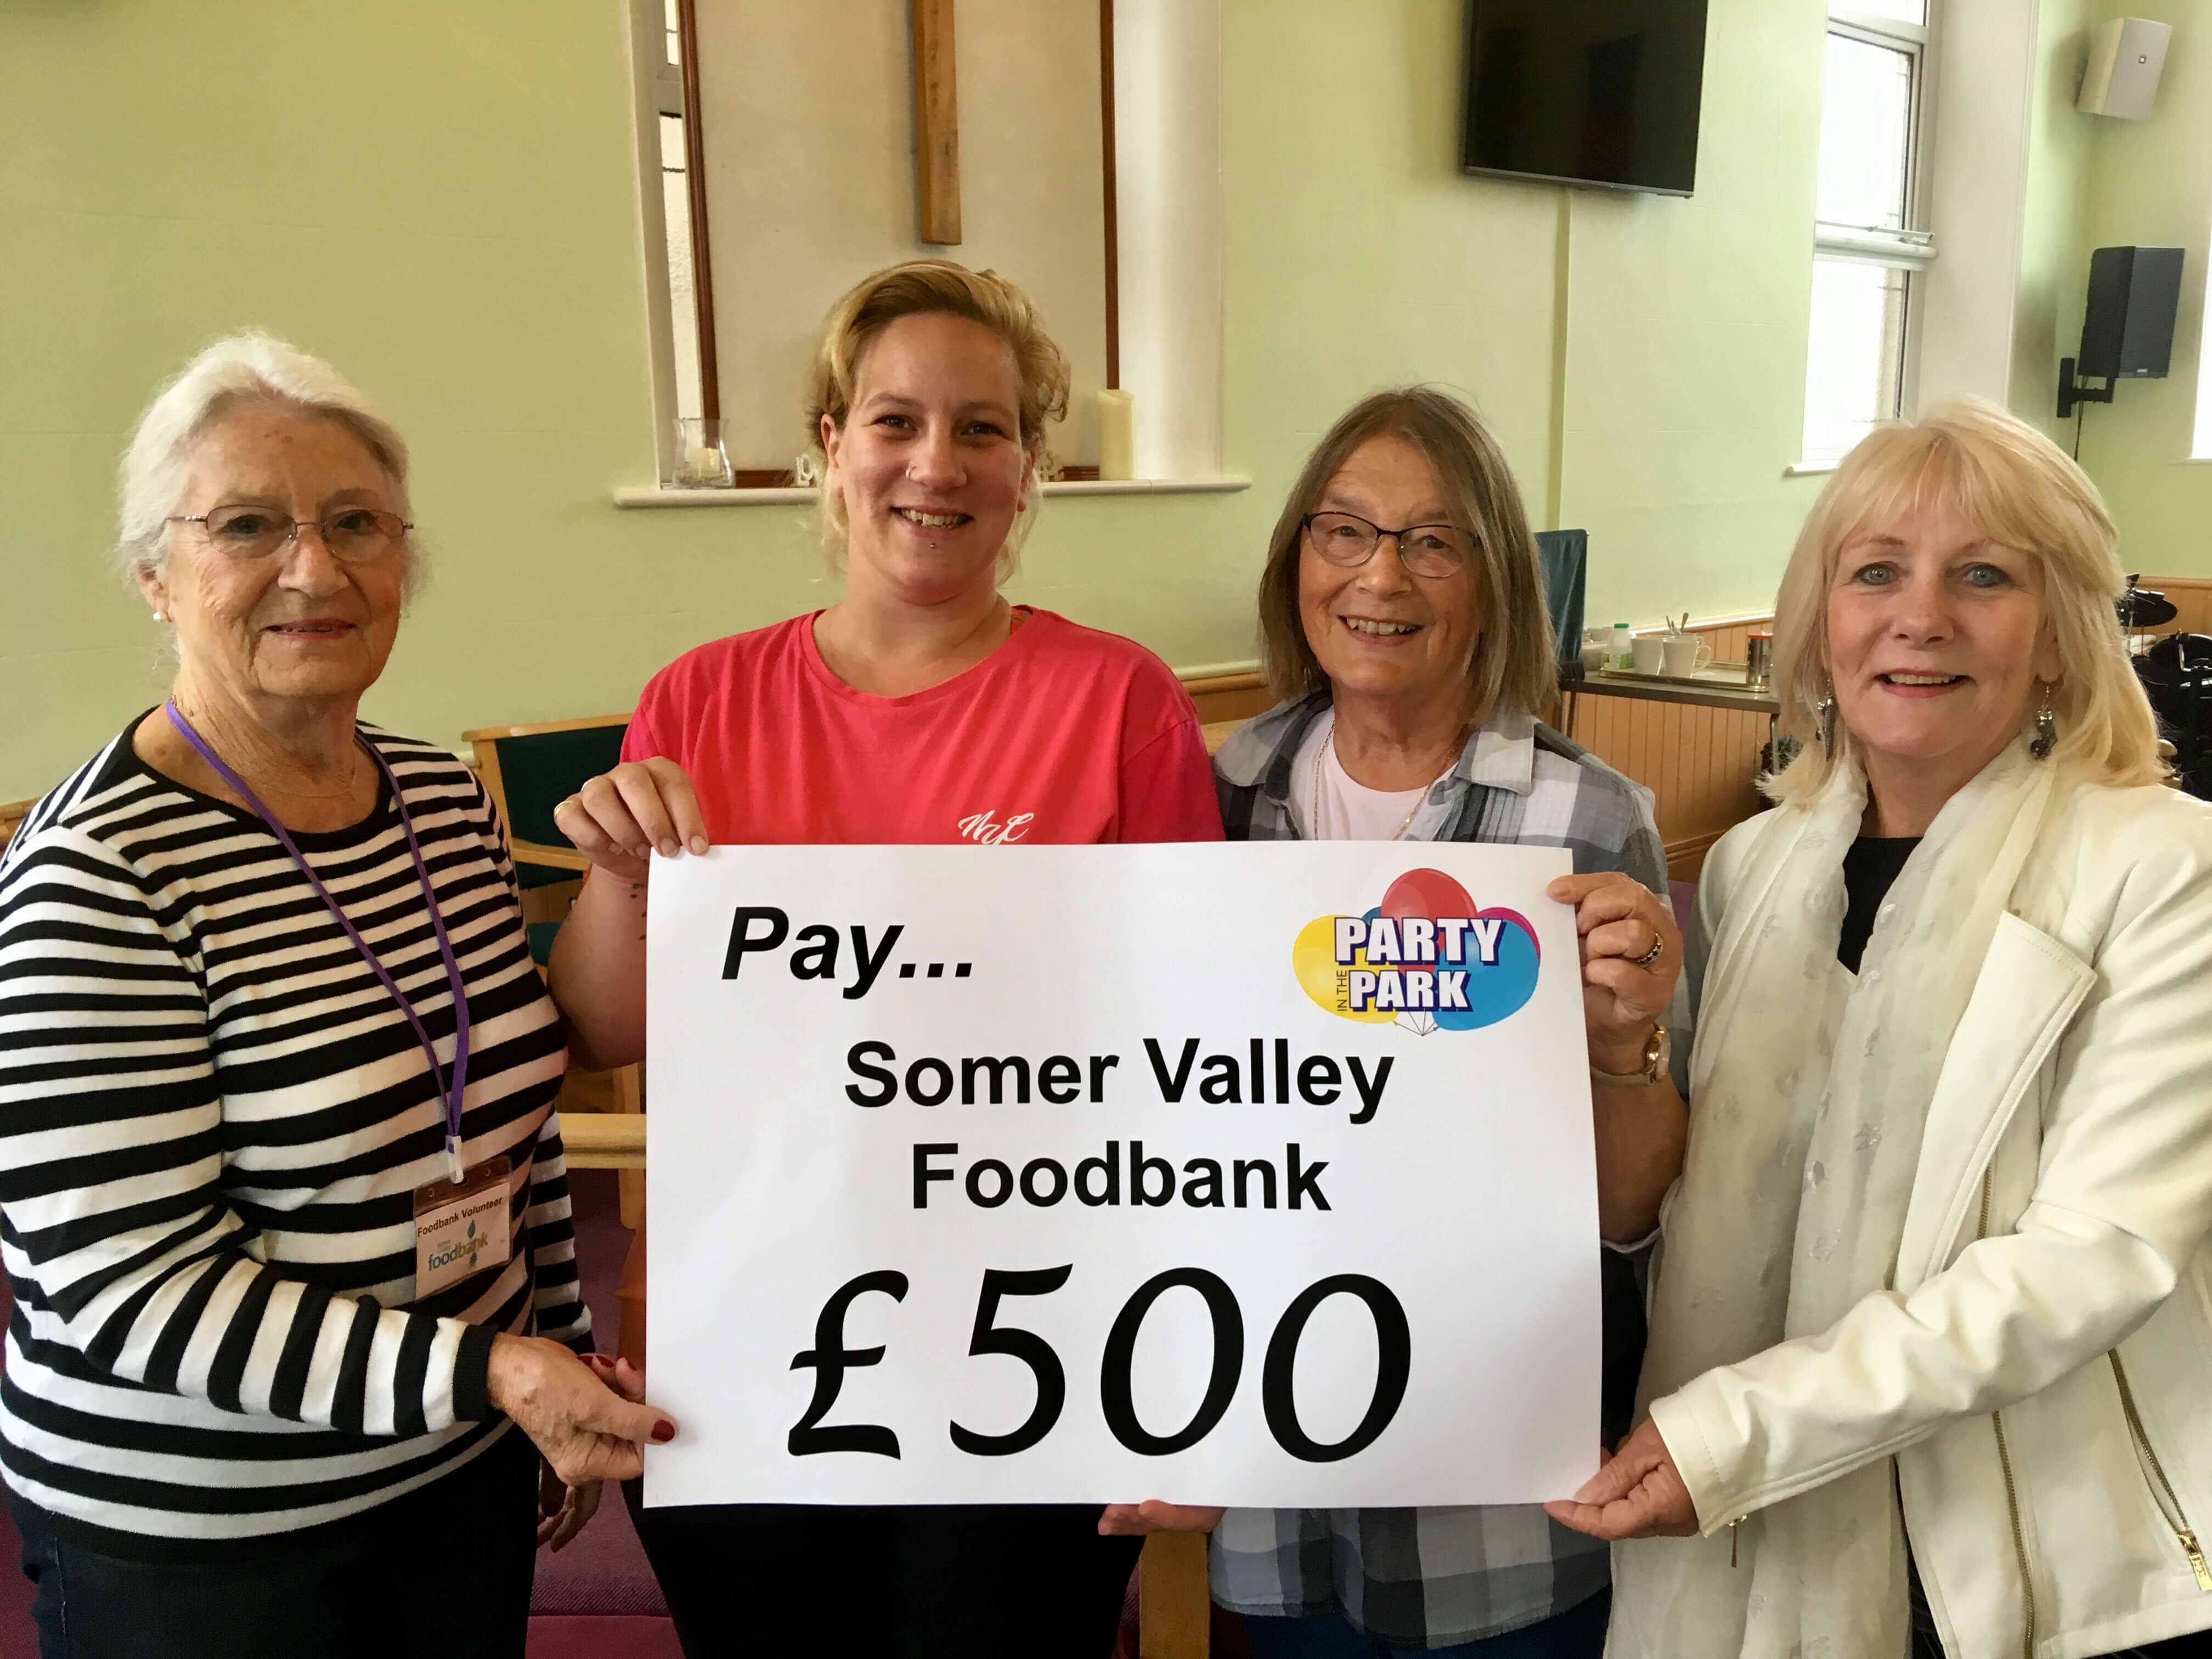 Peasedown festival thanks Somer Valley Foodbank with £500 donation!